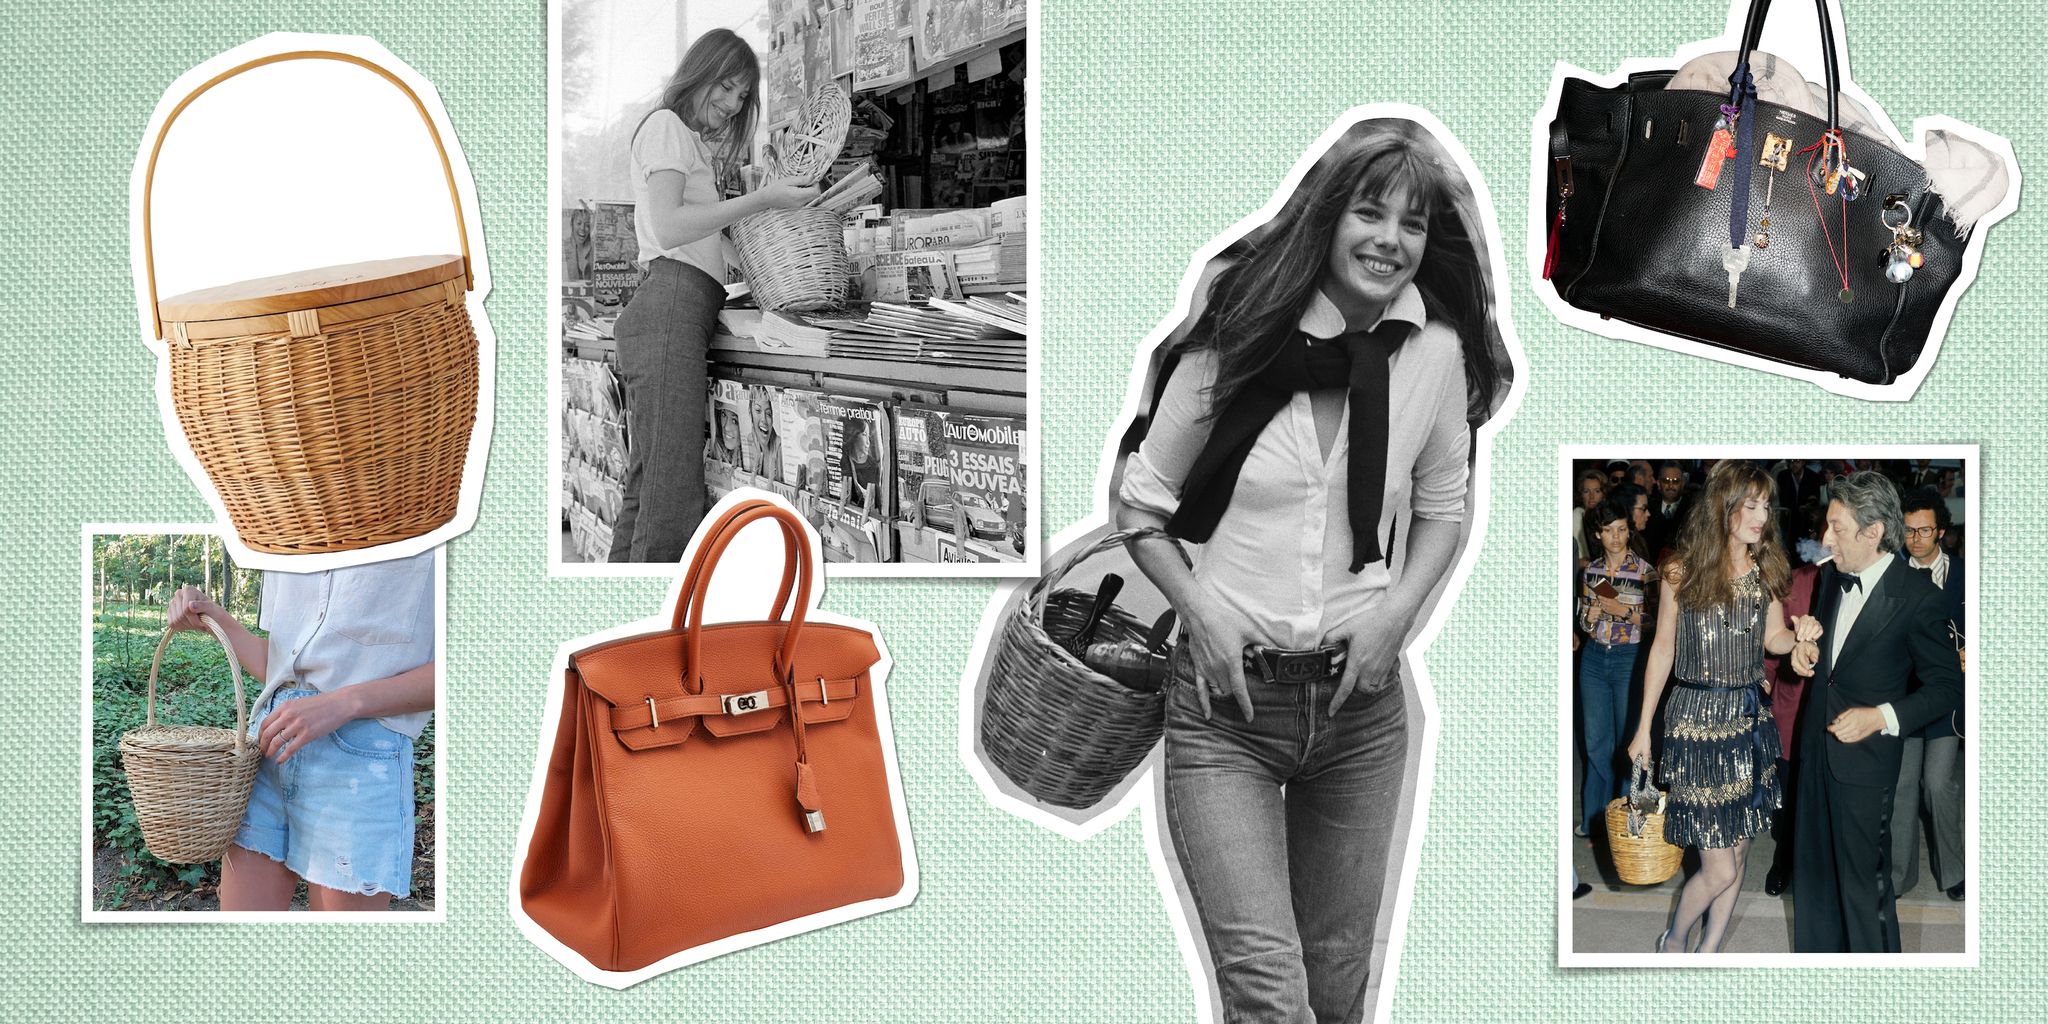 The Birkin Bag's Iconic History And Why It's So Expensive